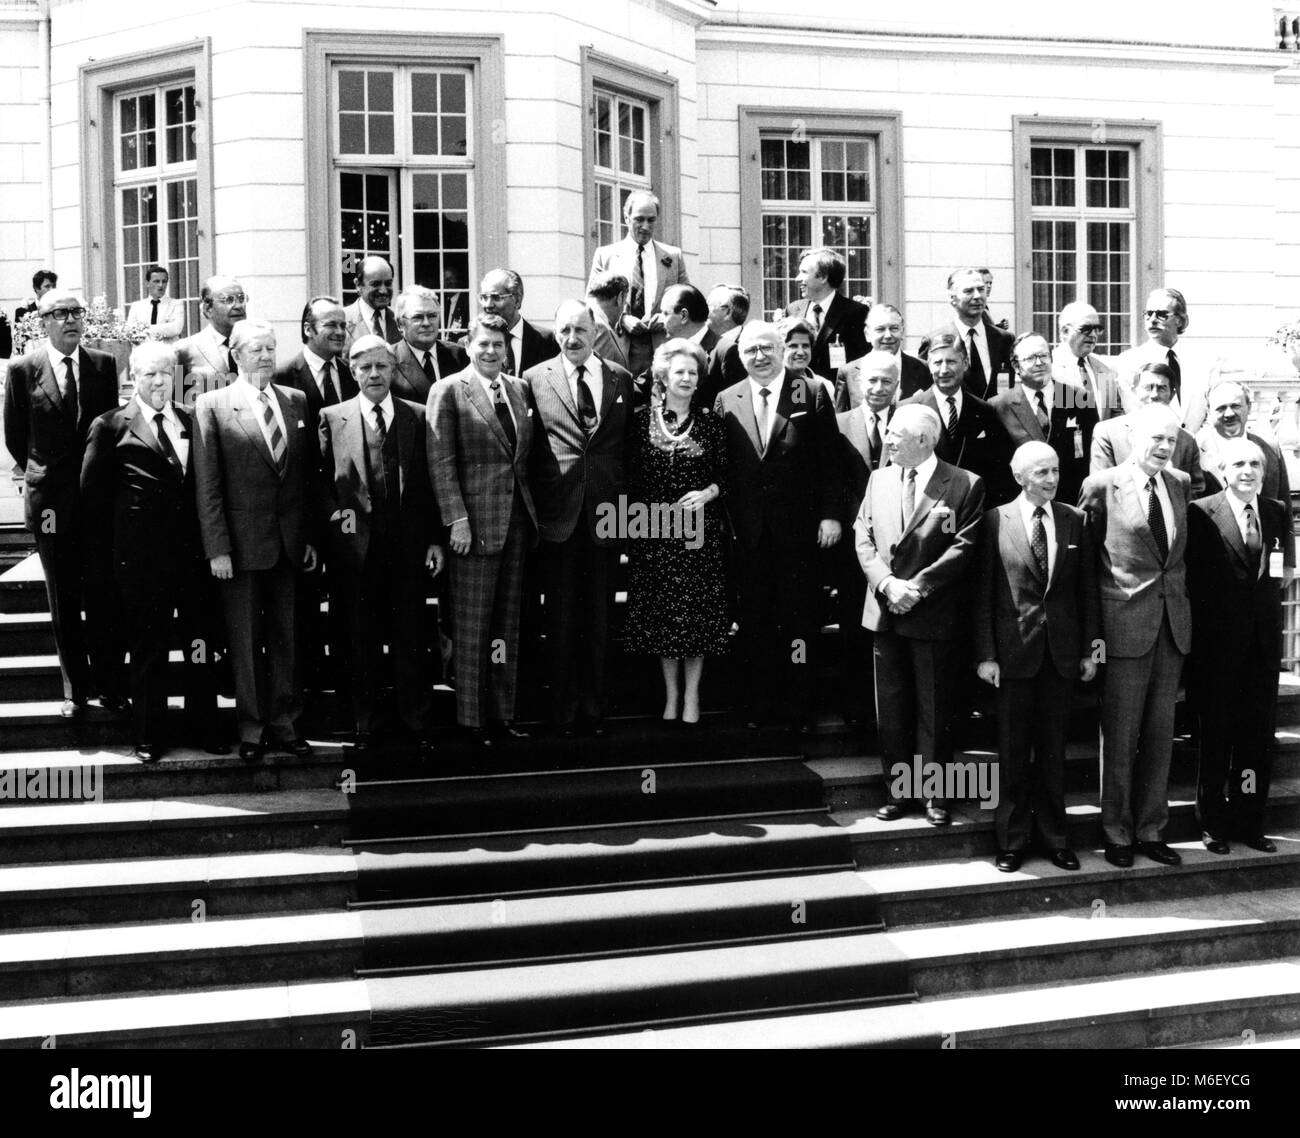 Portrait of the participants of the NATO Summit Meeting in Bonn with U S President Ronald Reagan and other world leaders including Margaret Thatcher of Great Britain and Pierre Trudeau of Canada (top center), Bonn, Germany, 6/11/1982. Stock Photo